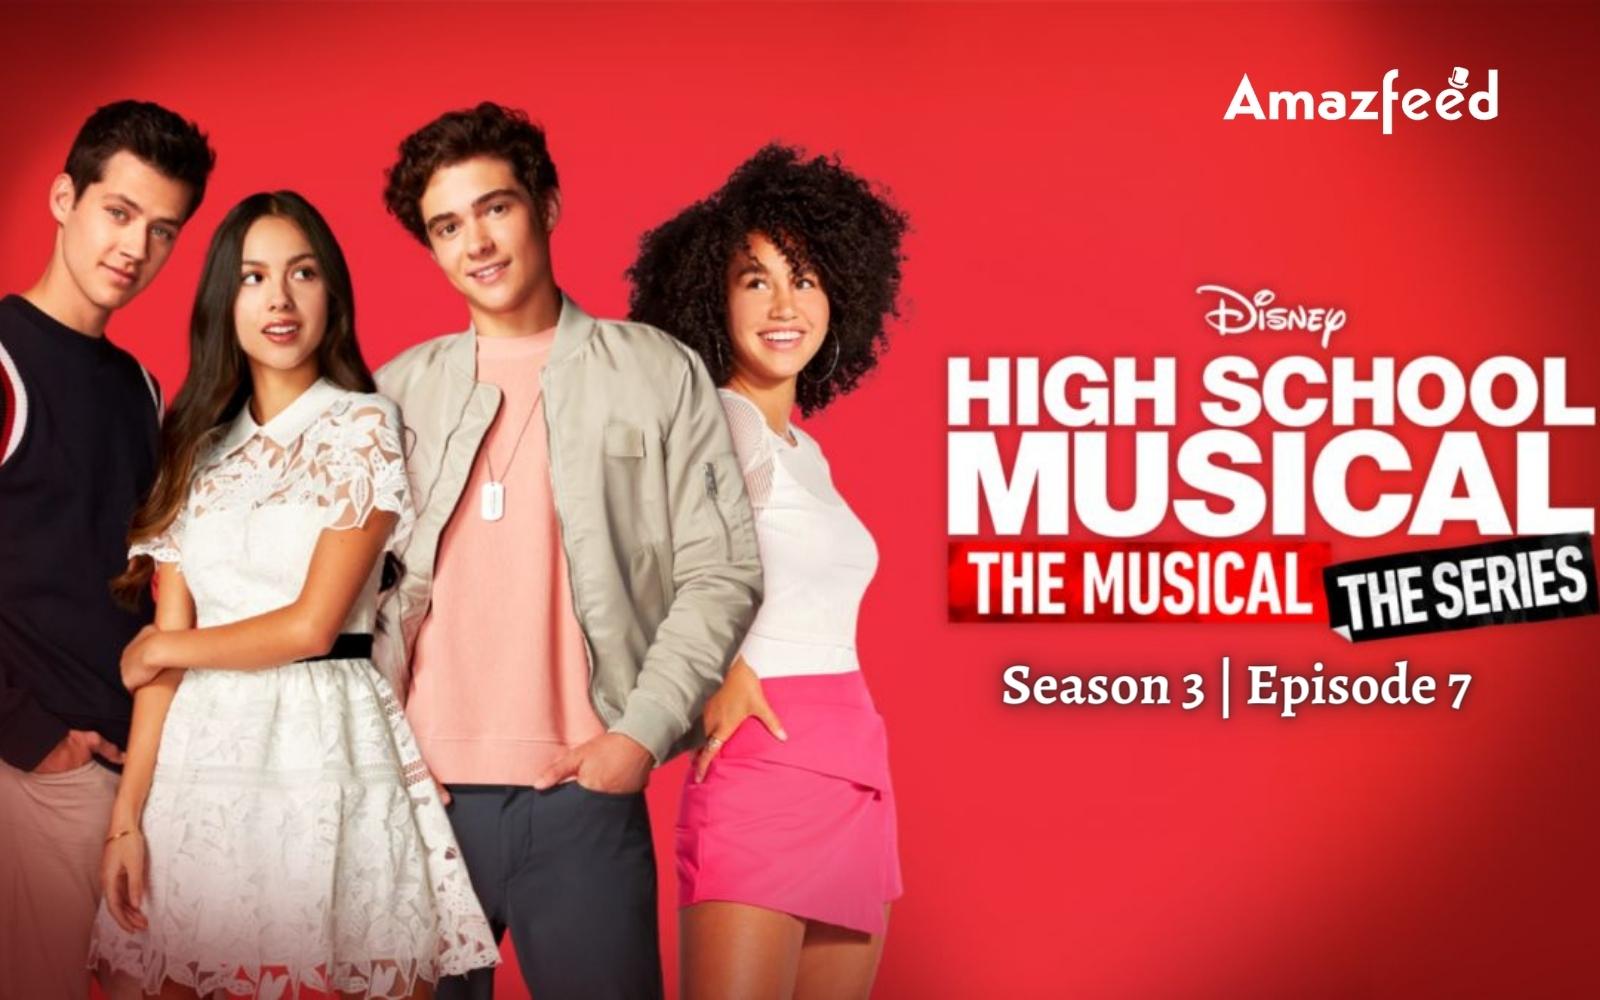 High School Musical: The Musical - The Series Season 3 Episode 7 ⇒ Countdown, Release Date, Spoilers, Recap, Cast & News Updates